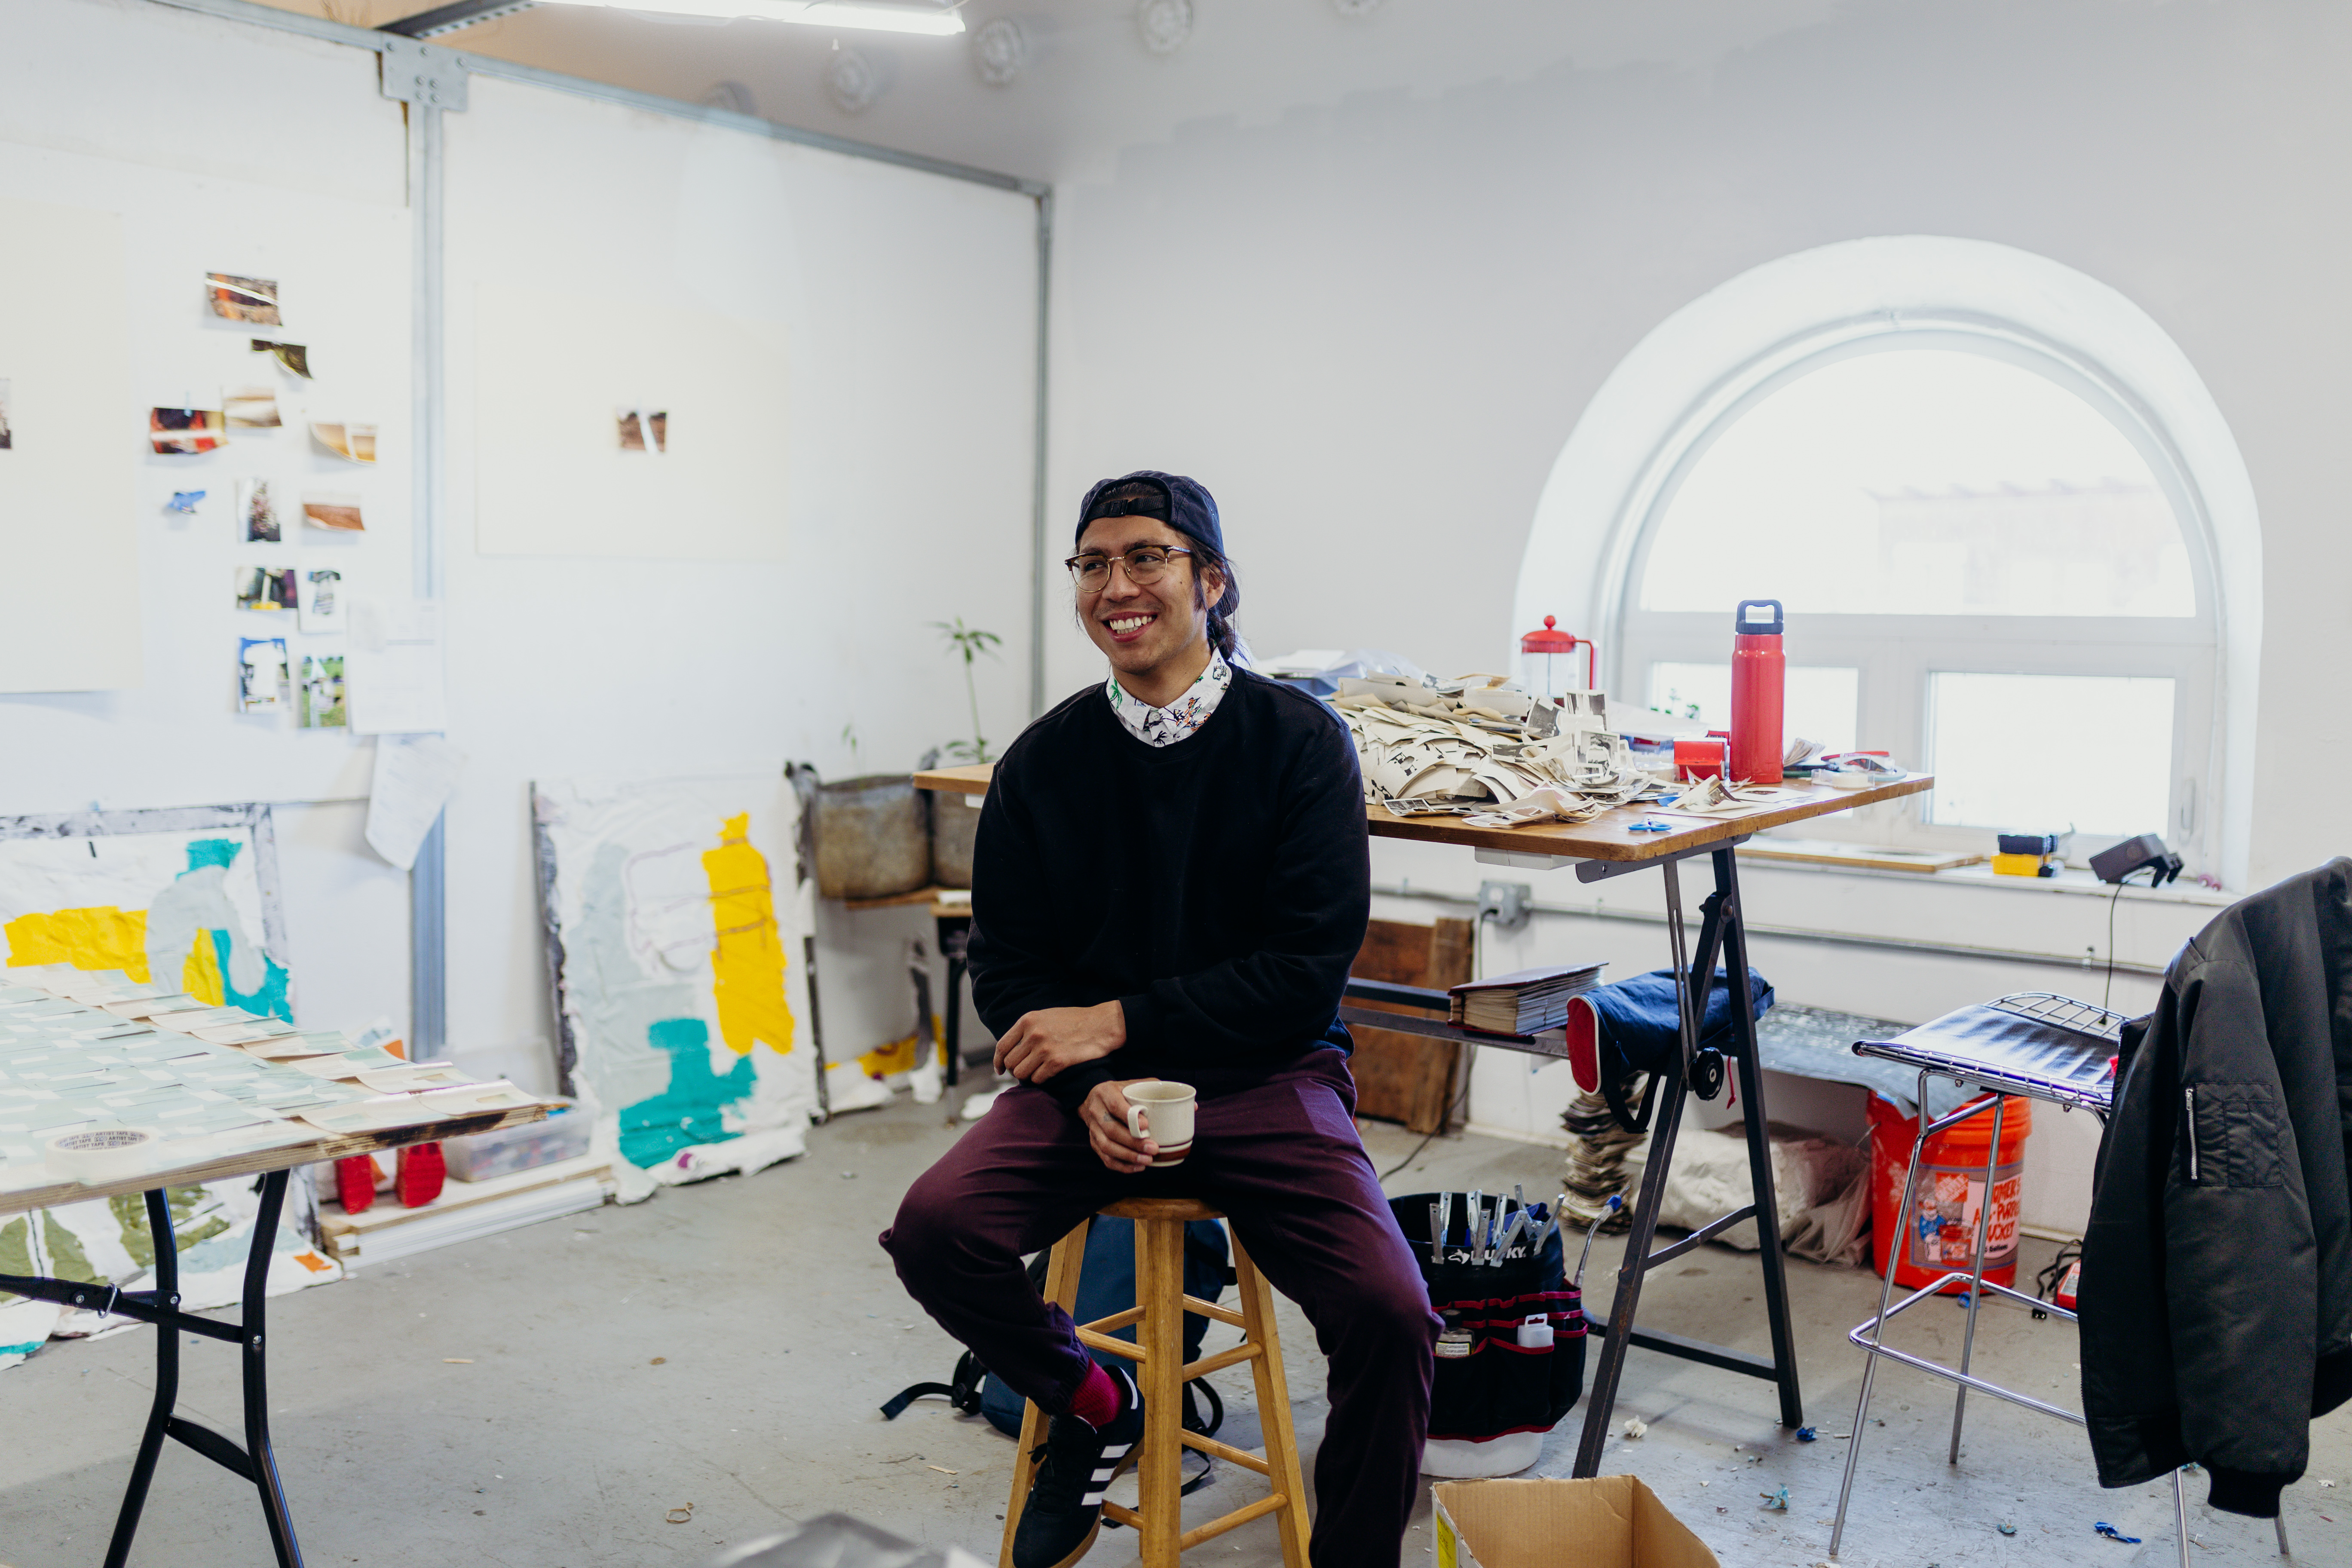 George P. Perez is sitting on a stool in his studio holding a mug and smiling at something off camera. Behind him is a table with various work materials. 